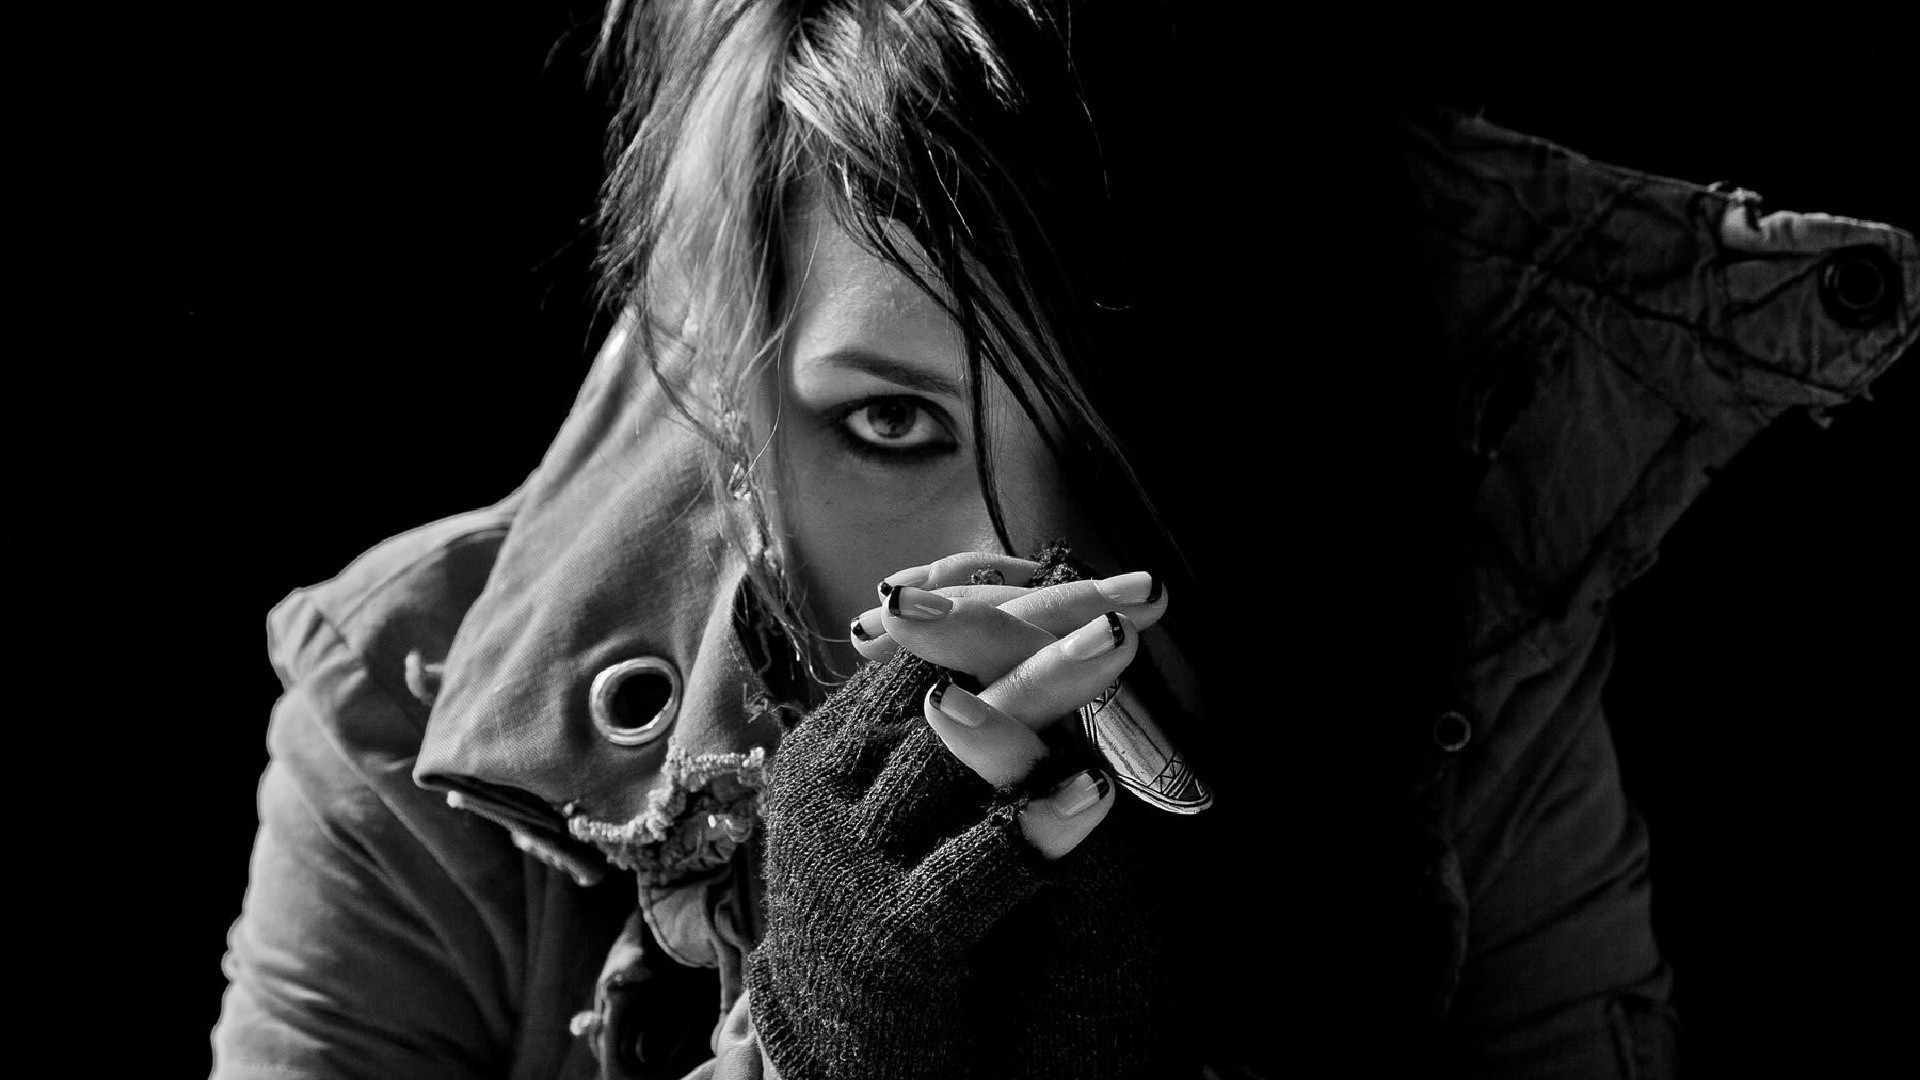 People 1920x1080 Skylar Grey women model fingers looking at viewer makeup simple background black background musician monochrome painted nails face American women